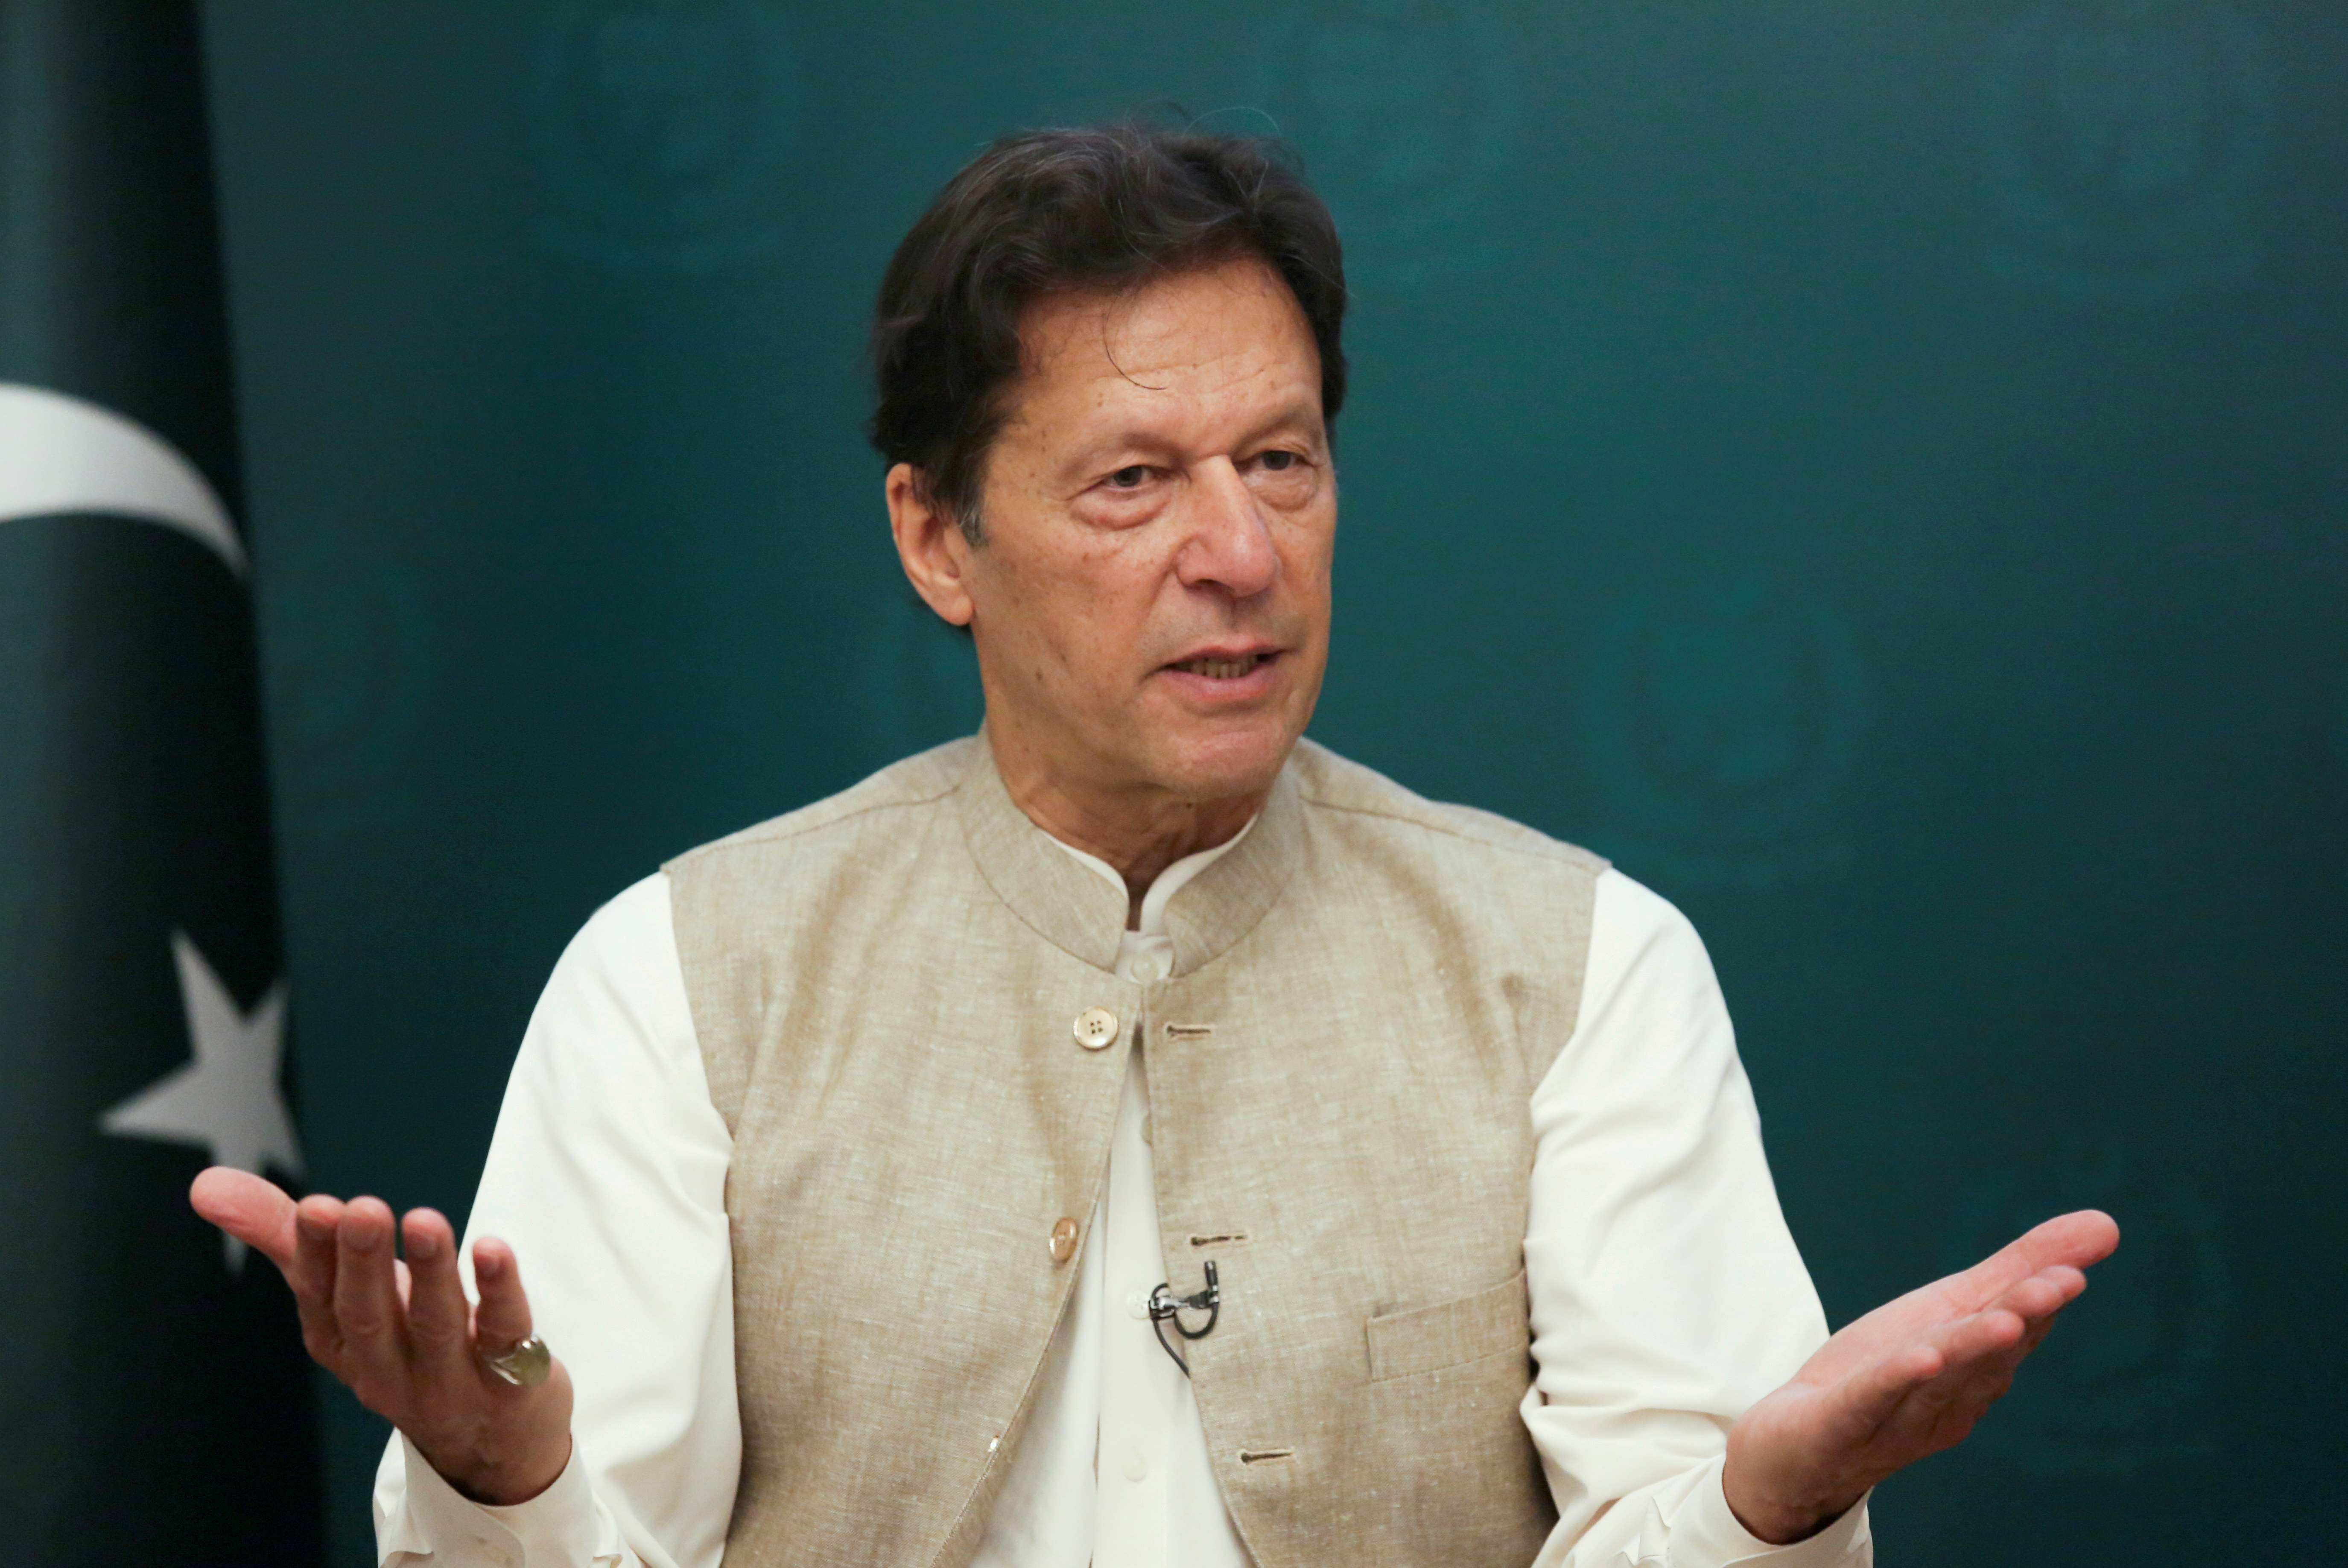 Pakistan's Prime Minister Imran Khan gestures during an interview with Reuters in Islamabad, Pakistan, June 4, 2021. REUTERS/Saiyna Bashir/File Photo